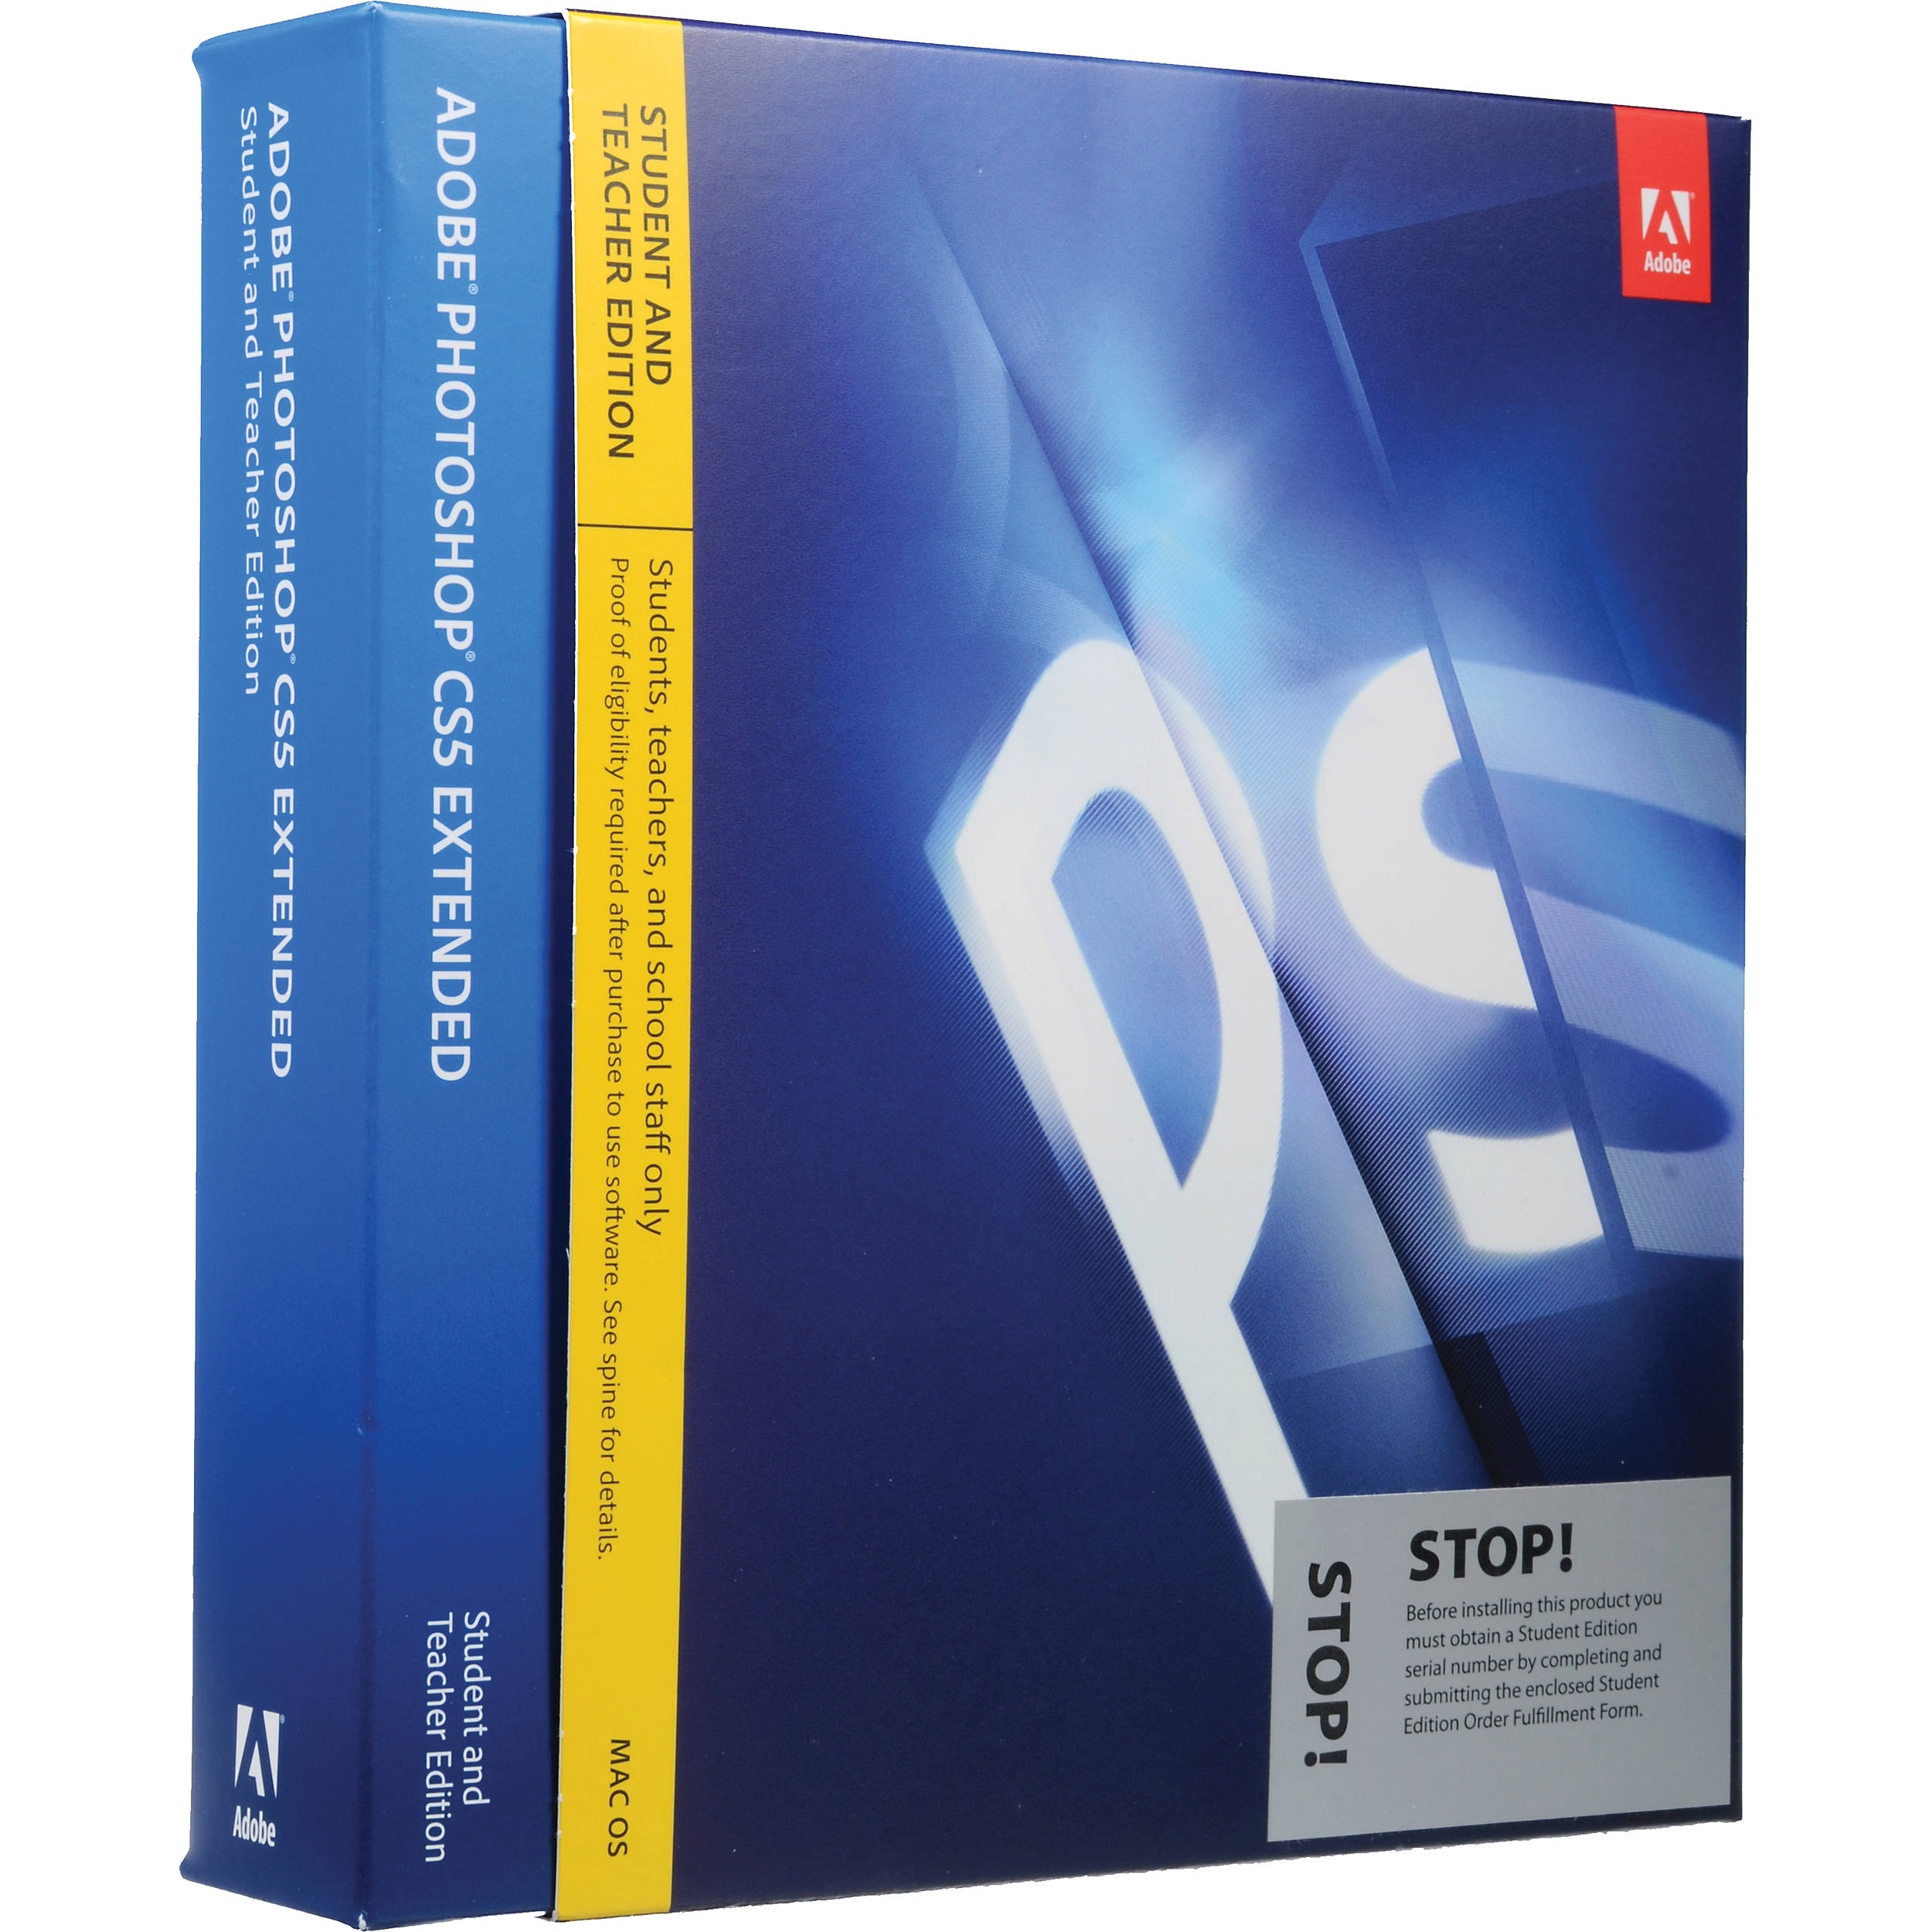 Photoshop Cs5 Software Free Download For Mac